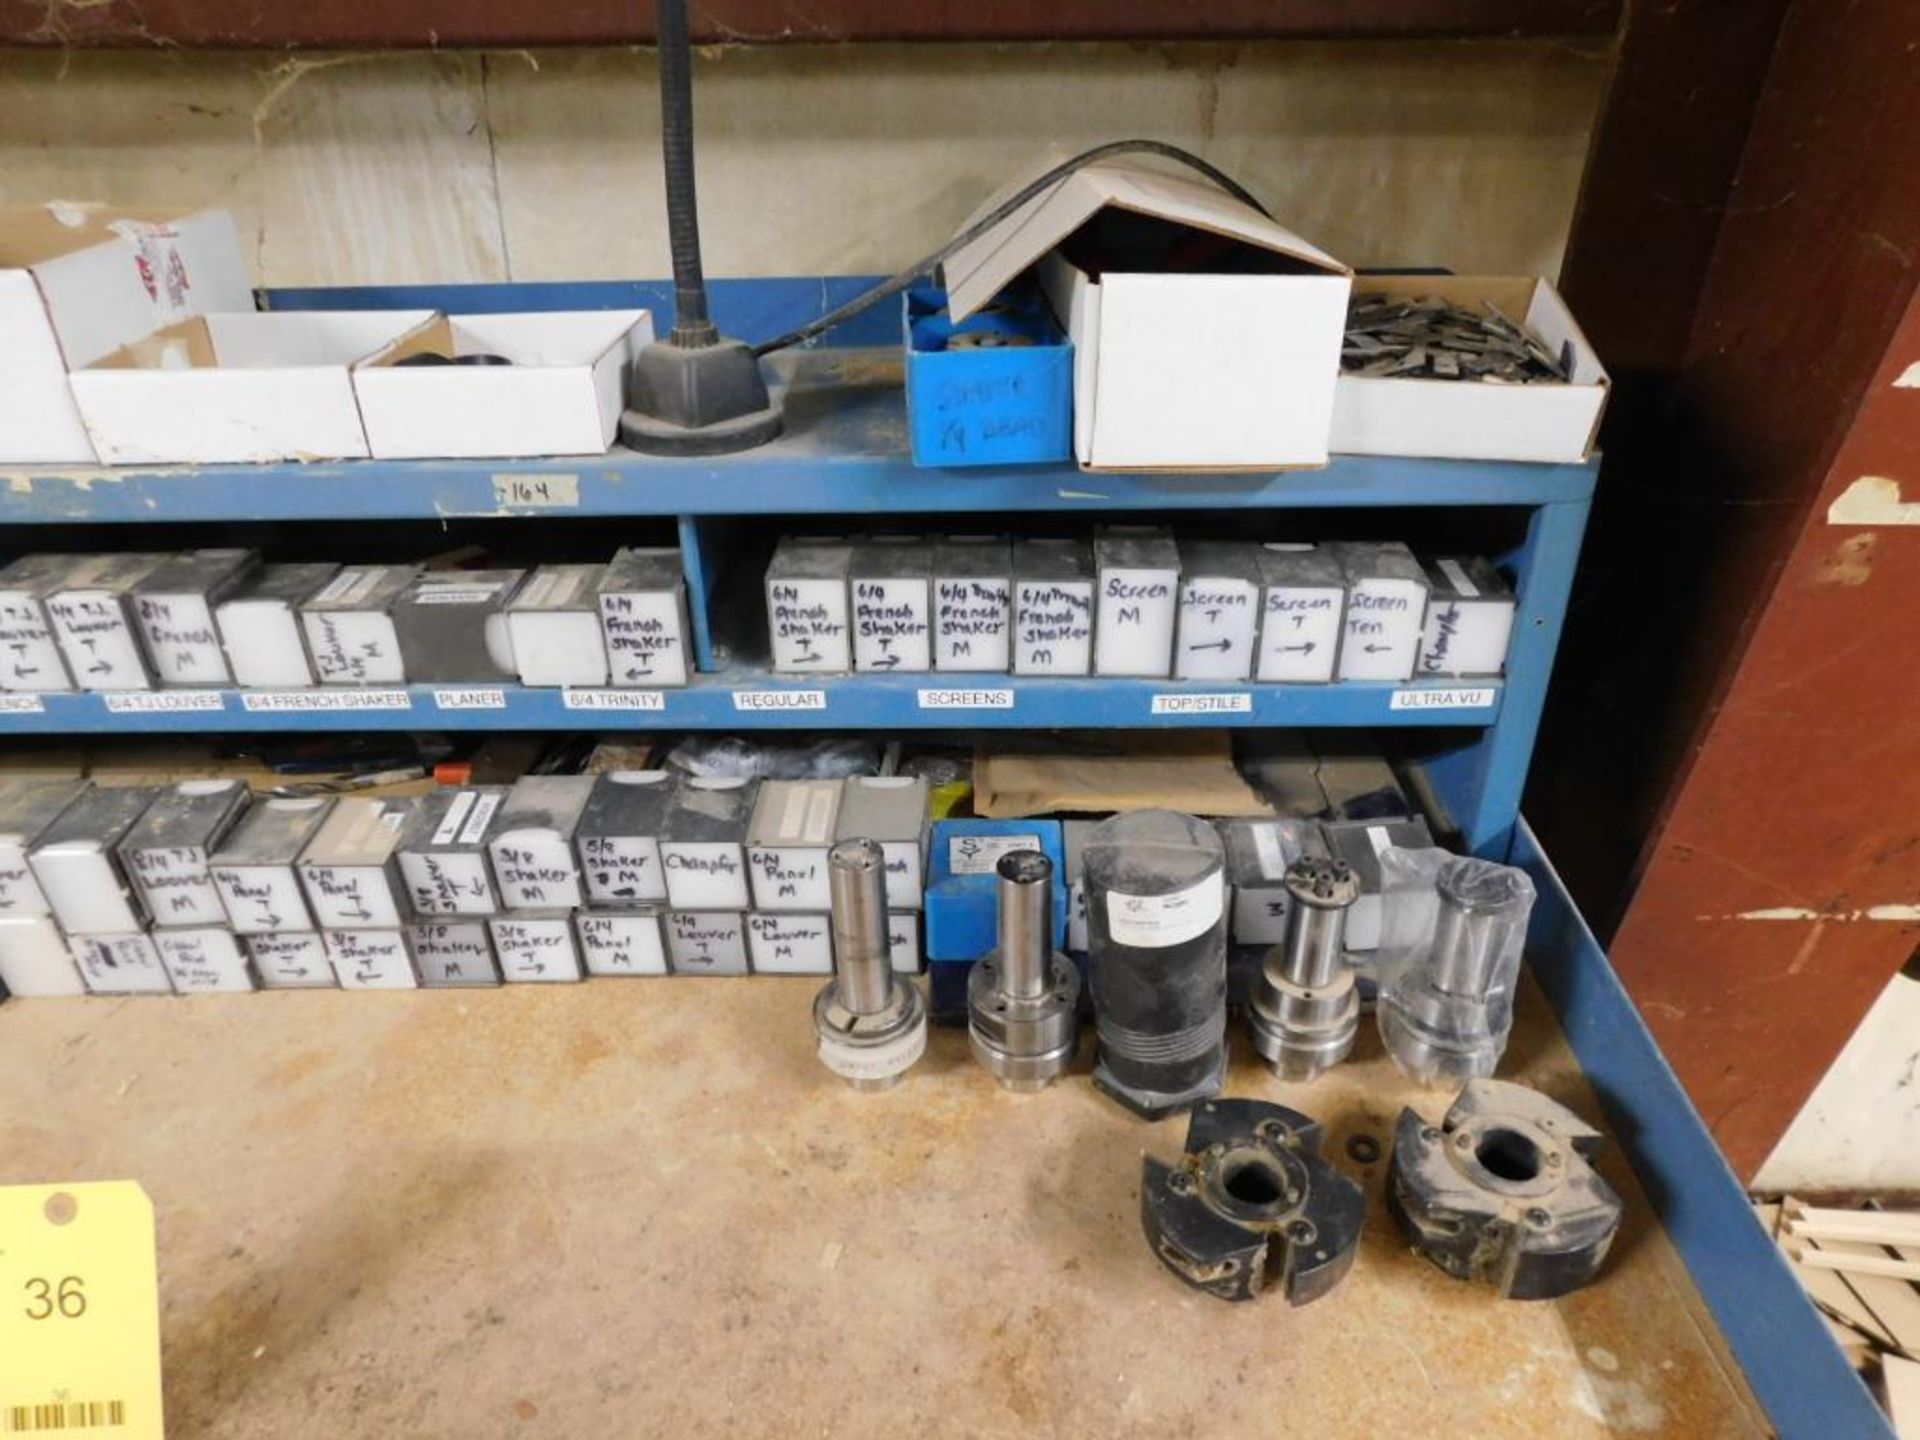 LOT: Large Assortment of Insert Knives & Assorted HSK Tool Holders w/Work Bench - Image 2 of 4